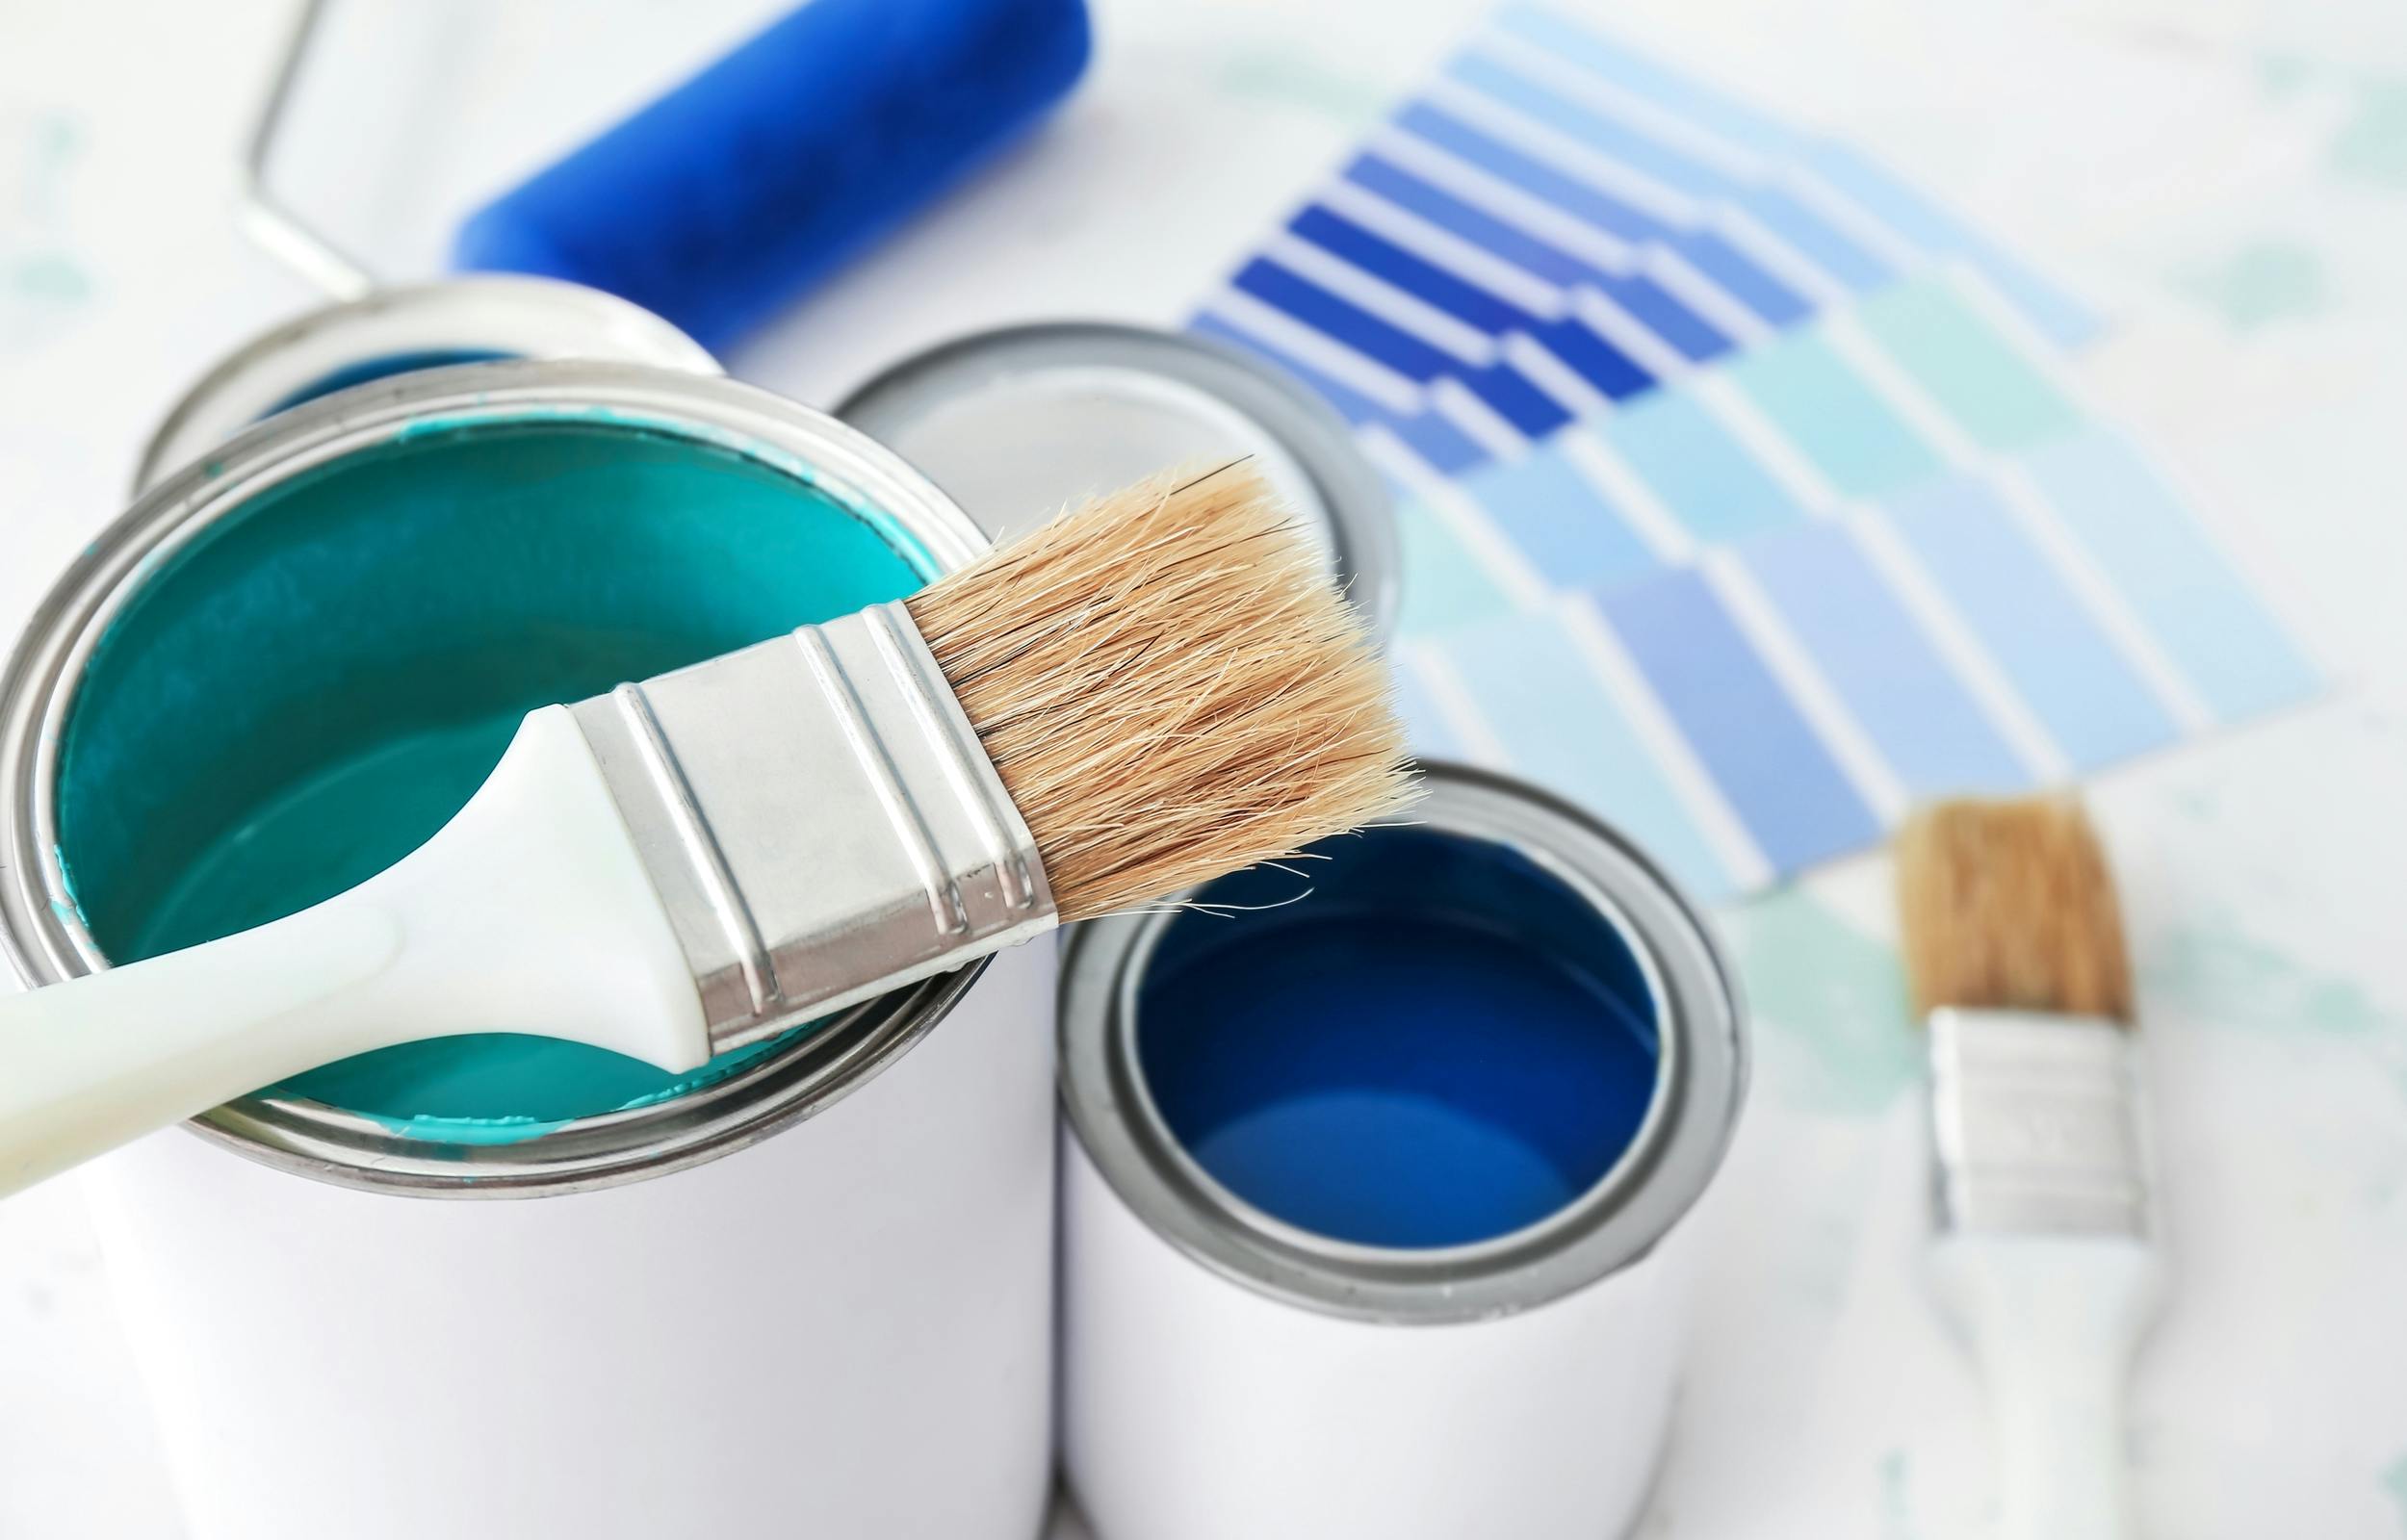 Vibrant indigo, turquoise, and green paint contrast stark white paint cans.  